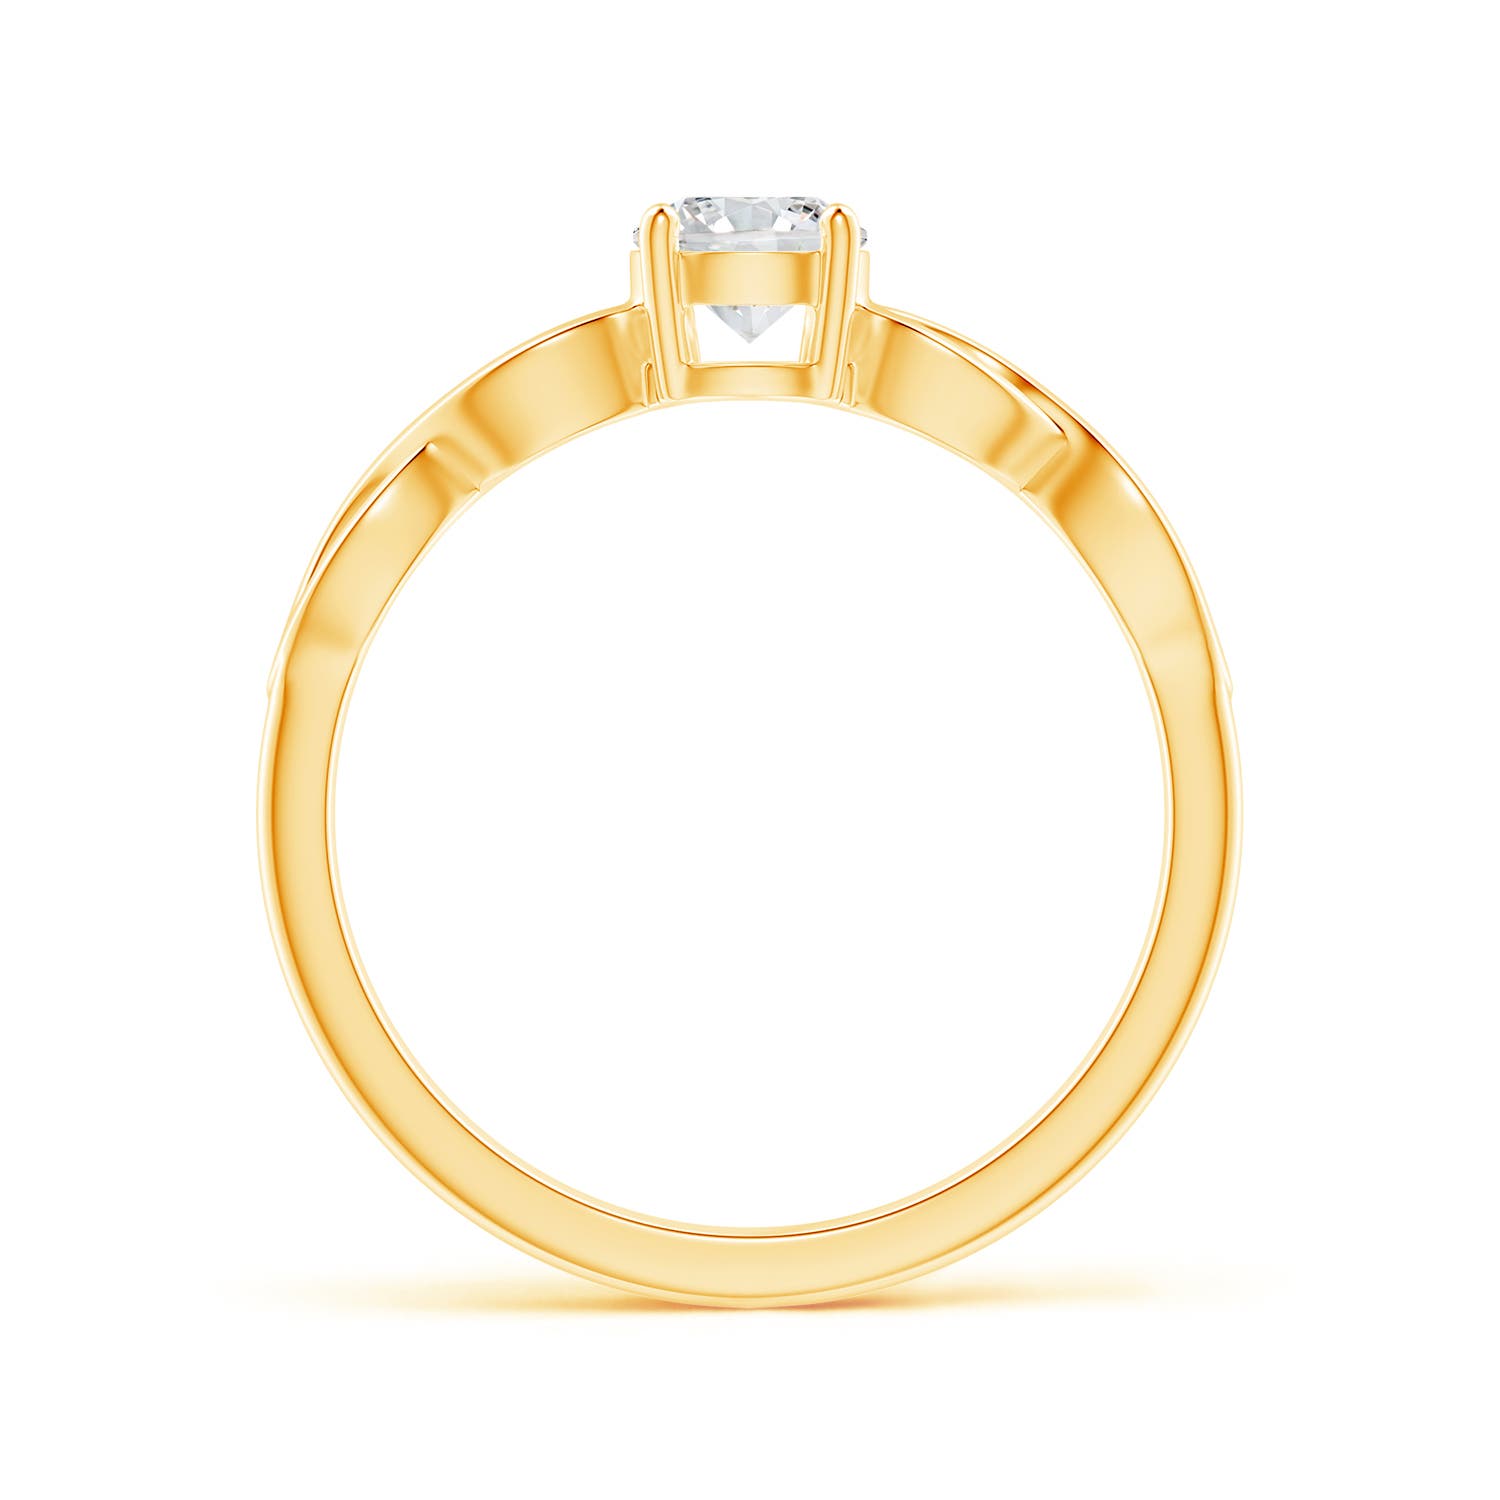 H, SI2 / 0.47 CT / 14 KT Yellow Gold